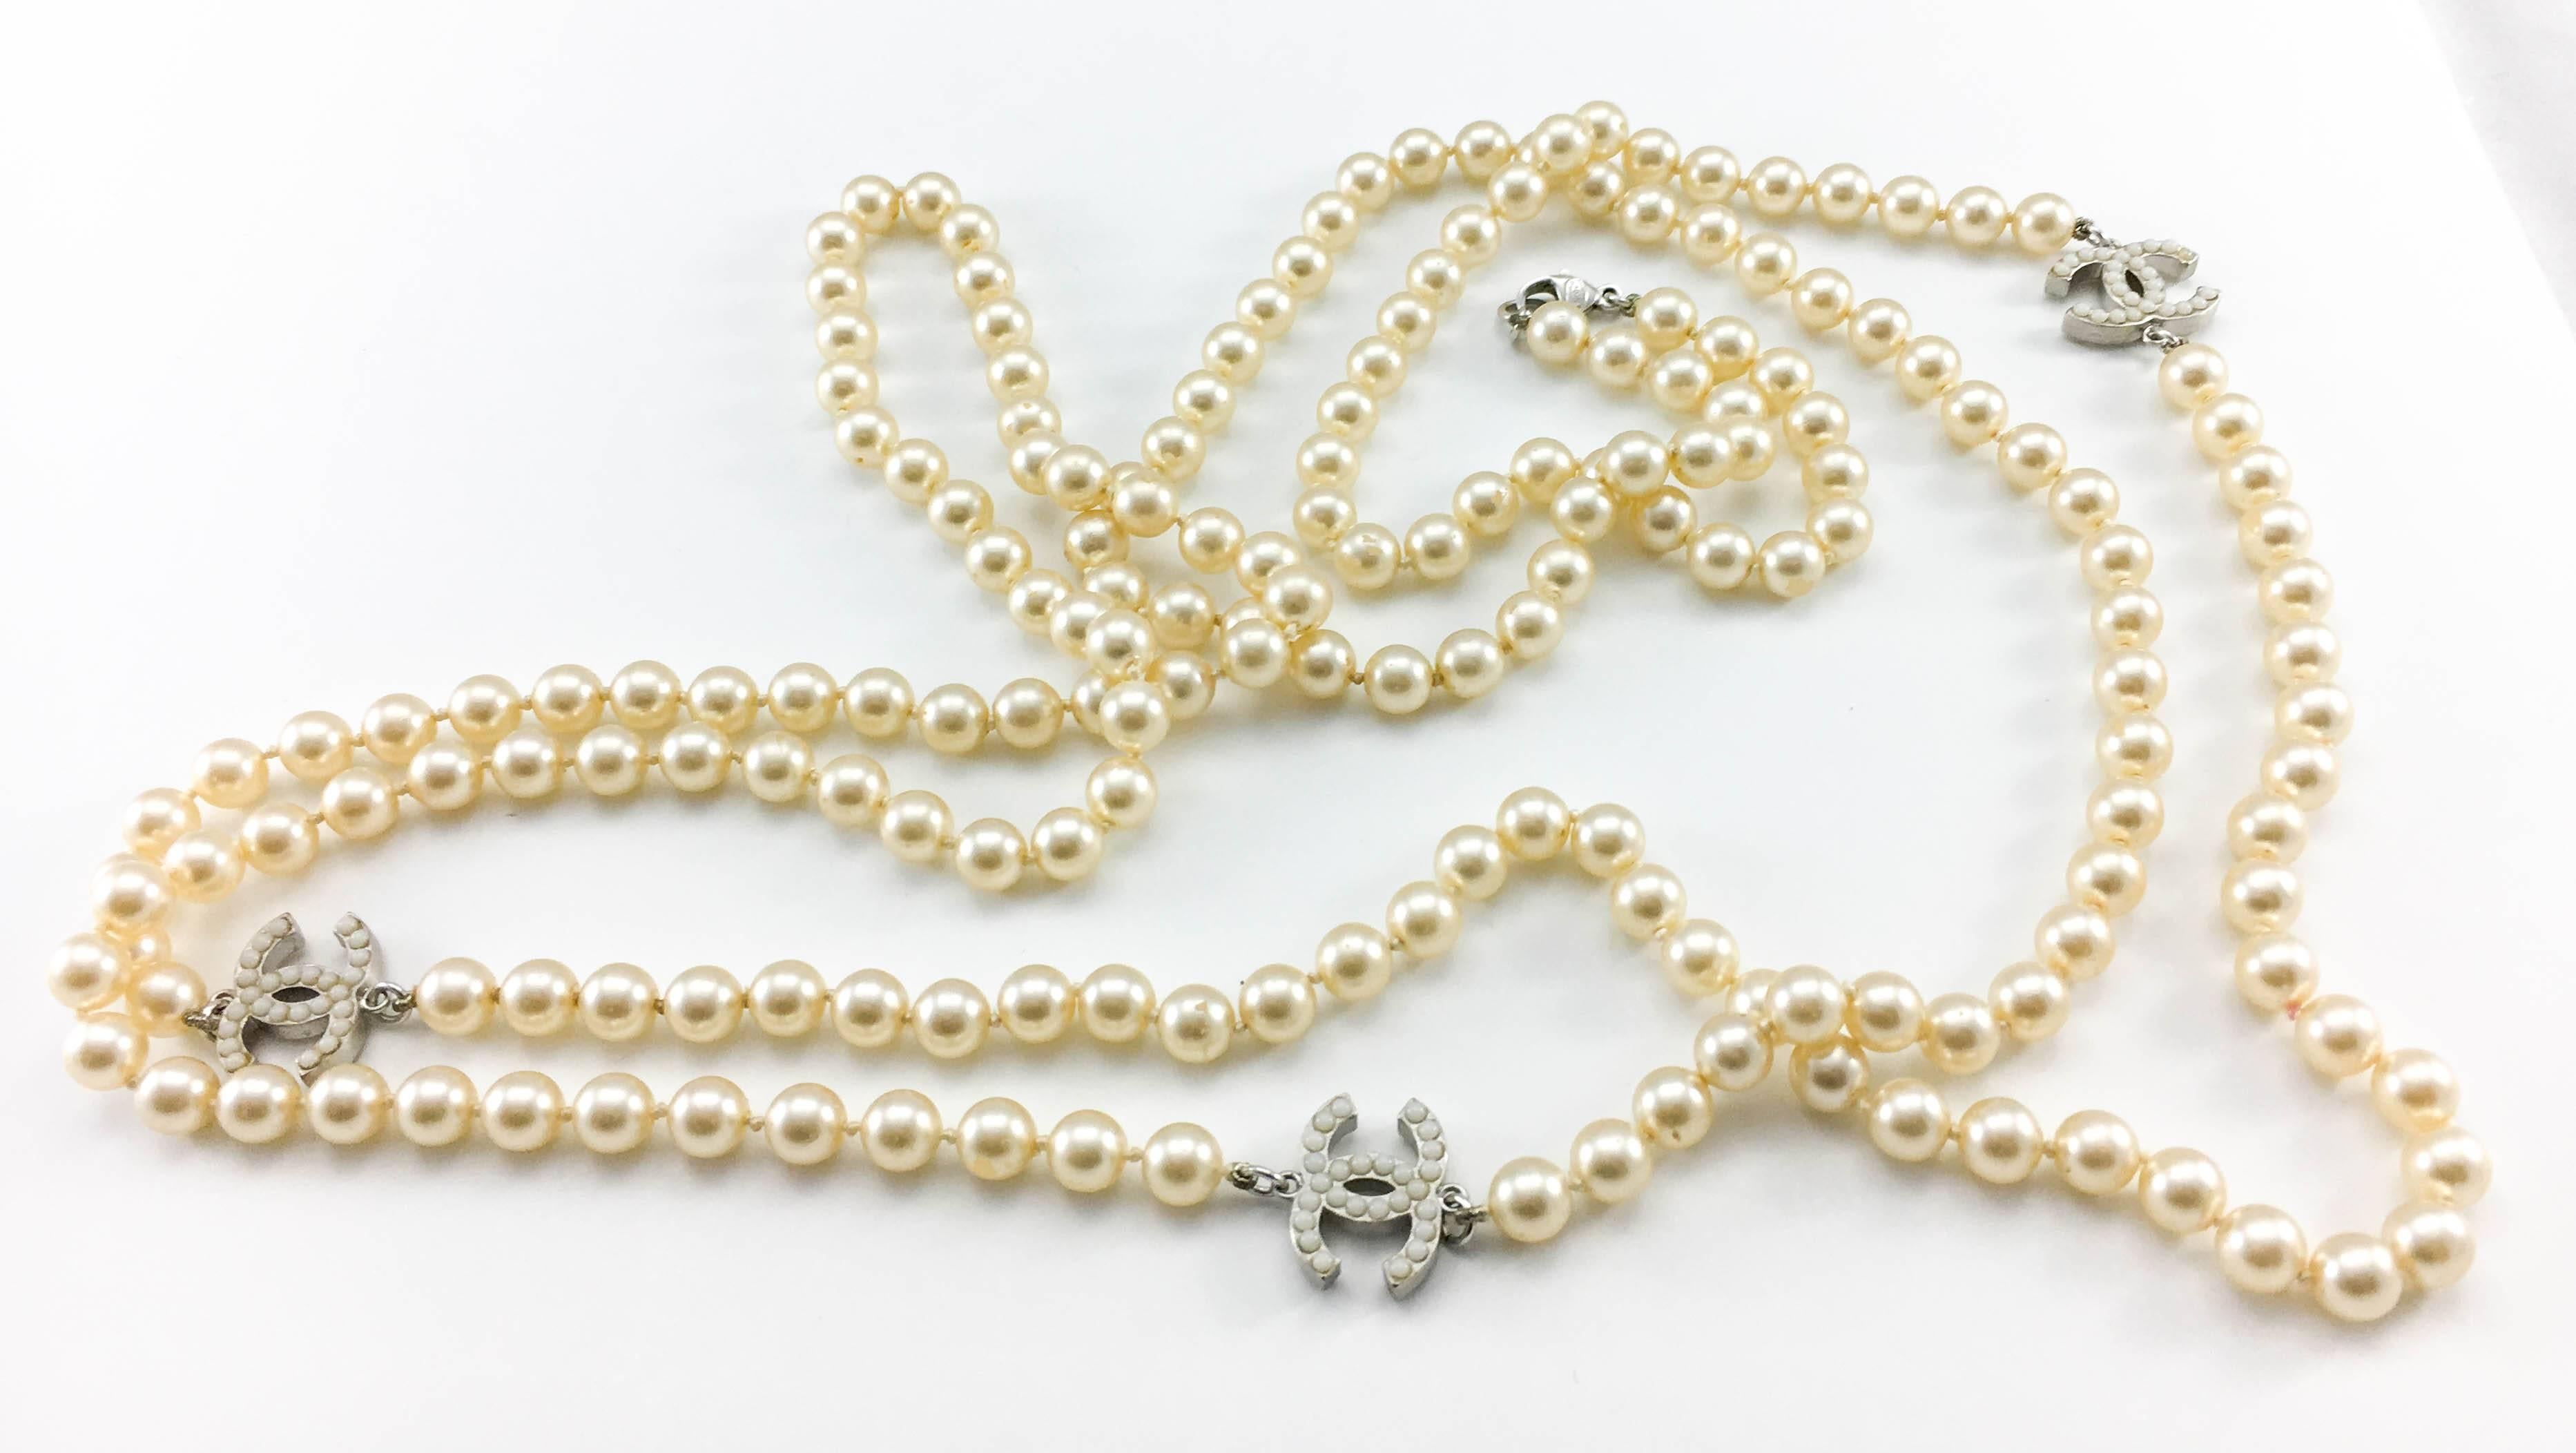 2008 Chanel Long Pearl Sautoir Necklace with 3 Inset Pearl 'CC' Logos 4